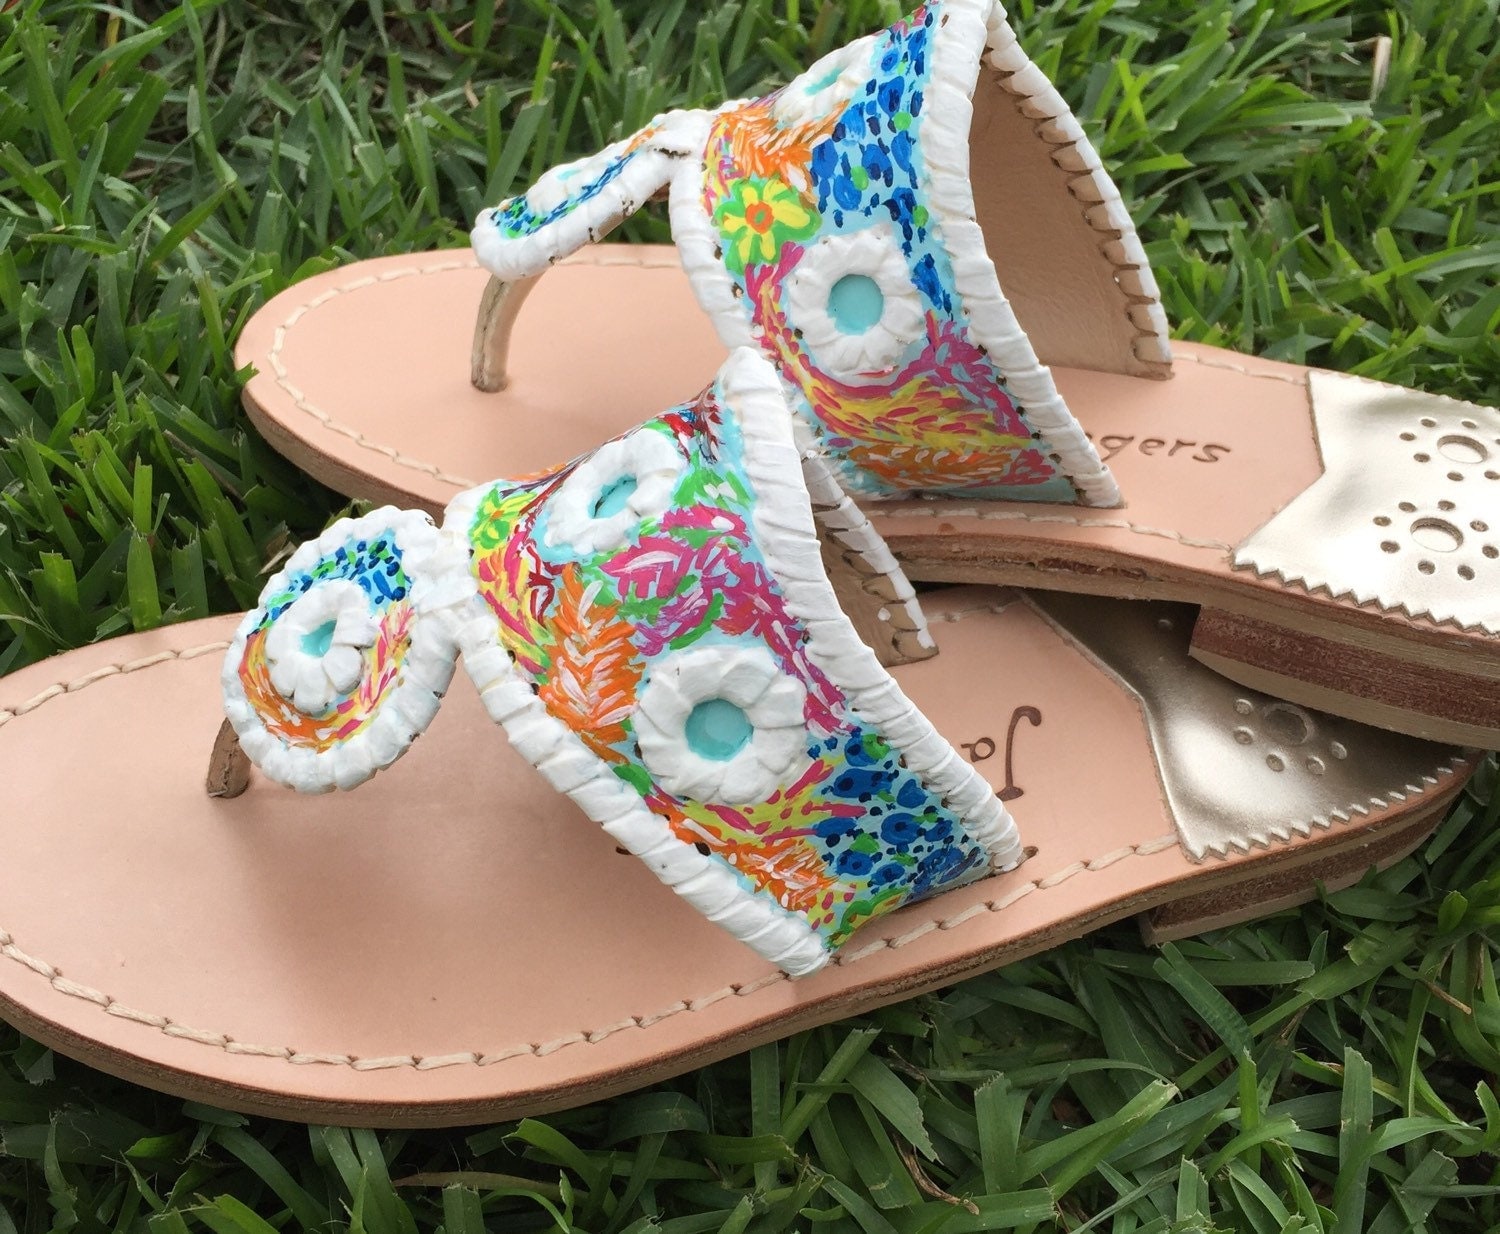 Authentic Jack Rogers hand painted in Lilly Pulitzer inspired